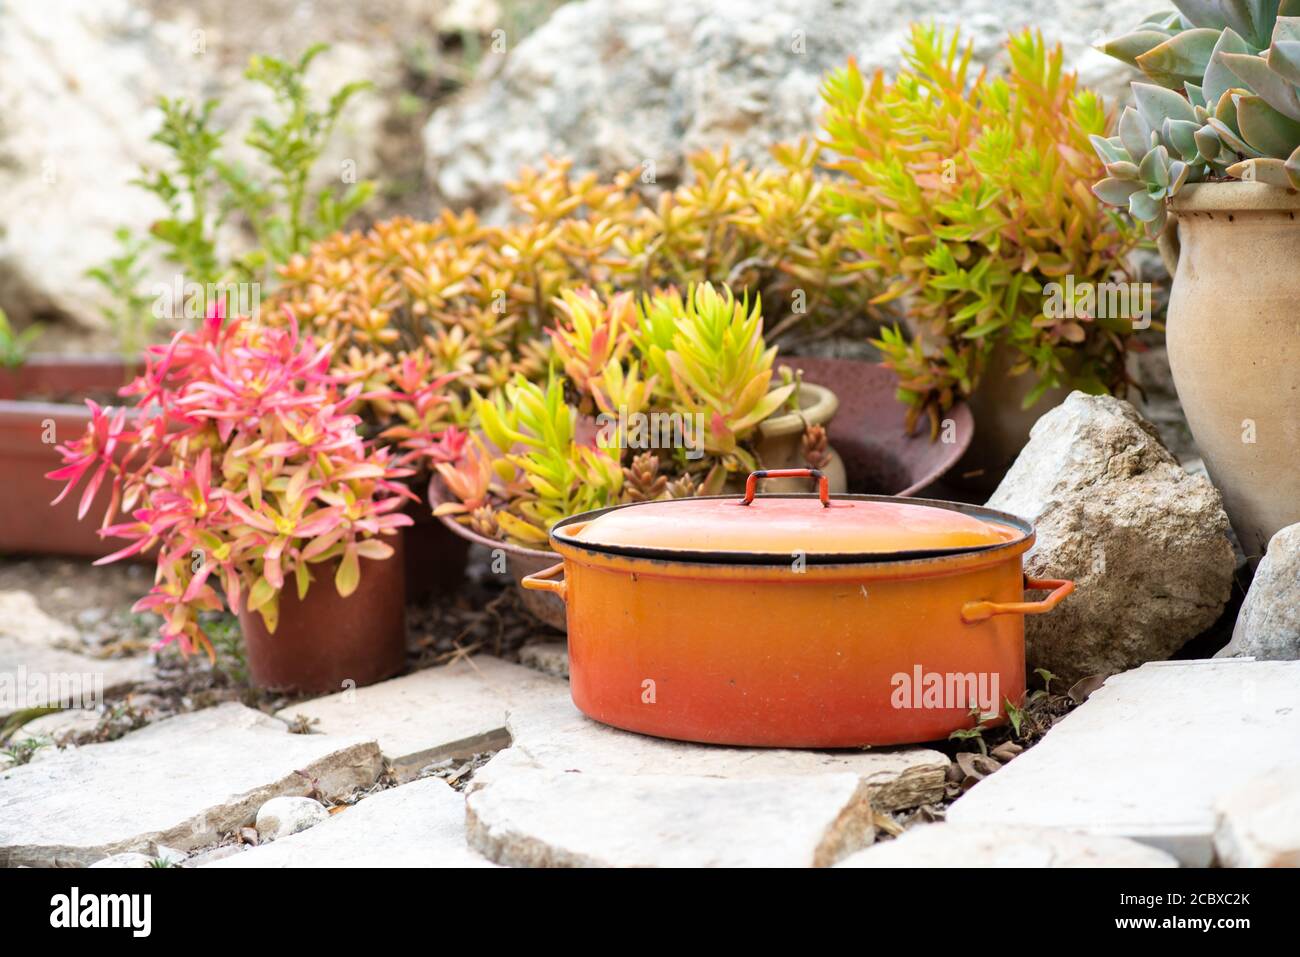 Recycled garden design and low-waste lifestyle. Reduce, reuse, recycle planter craft ideas. Stock Photo